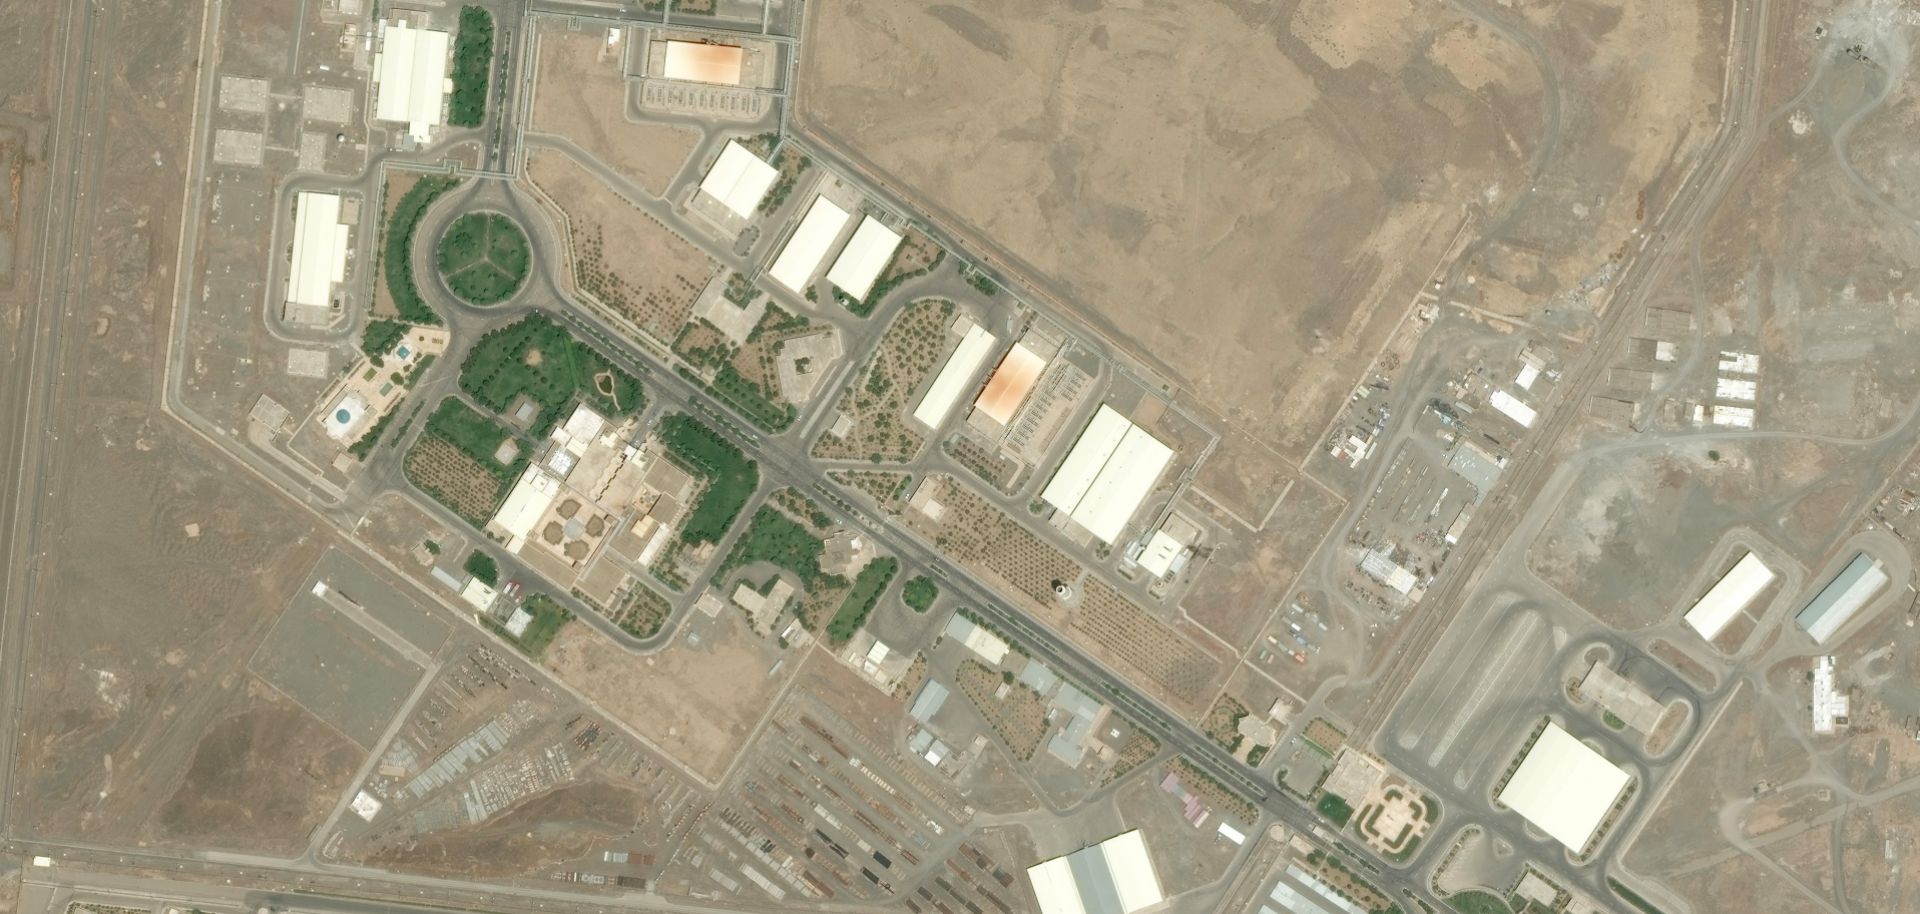 Much of Iran's Natanz Fuel Enrichment Facility, as shown in a satellite photo, exists about 8 meters underground, protected by a 2.5 meter concrete wall.